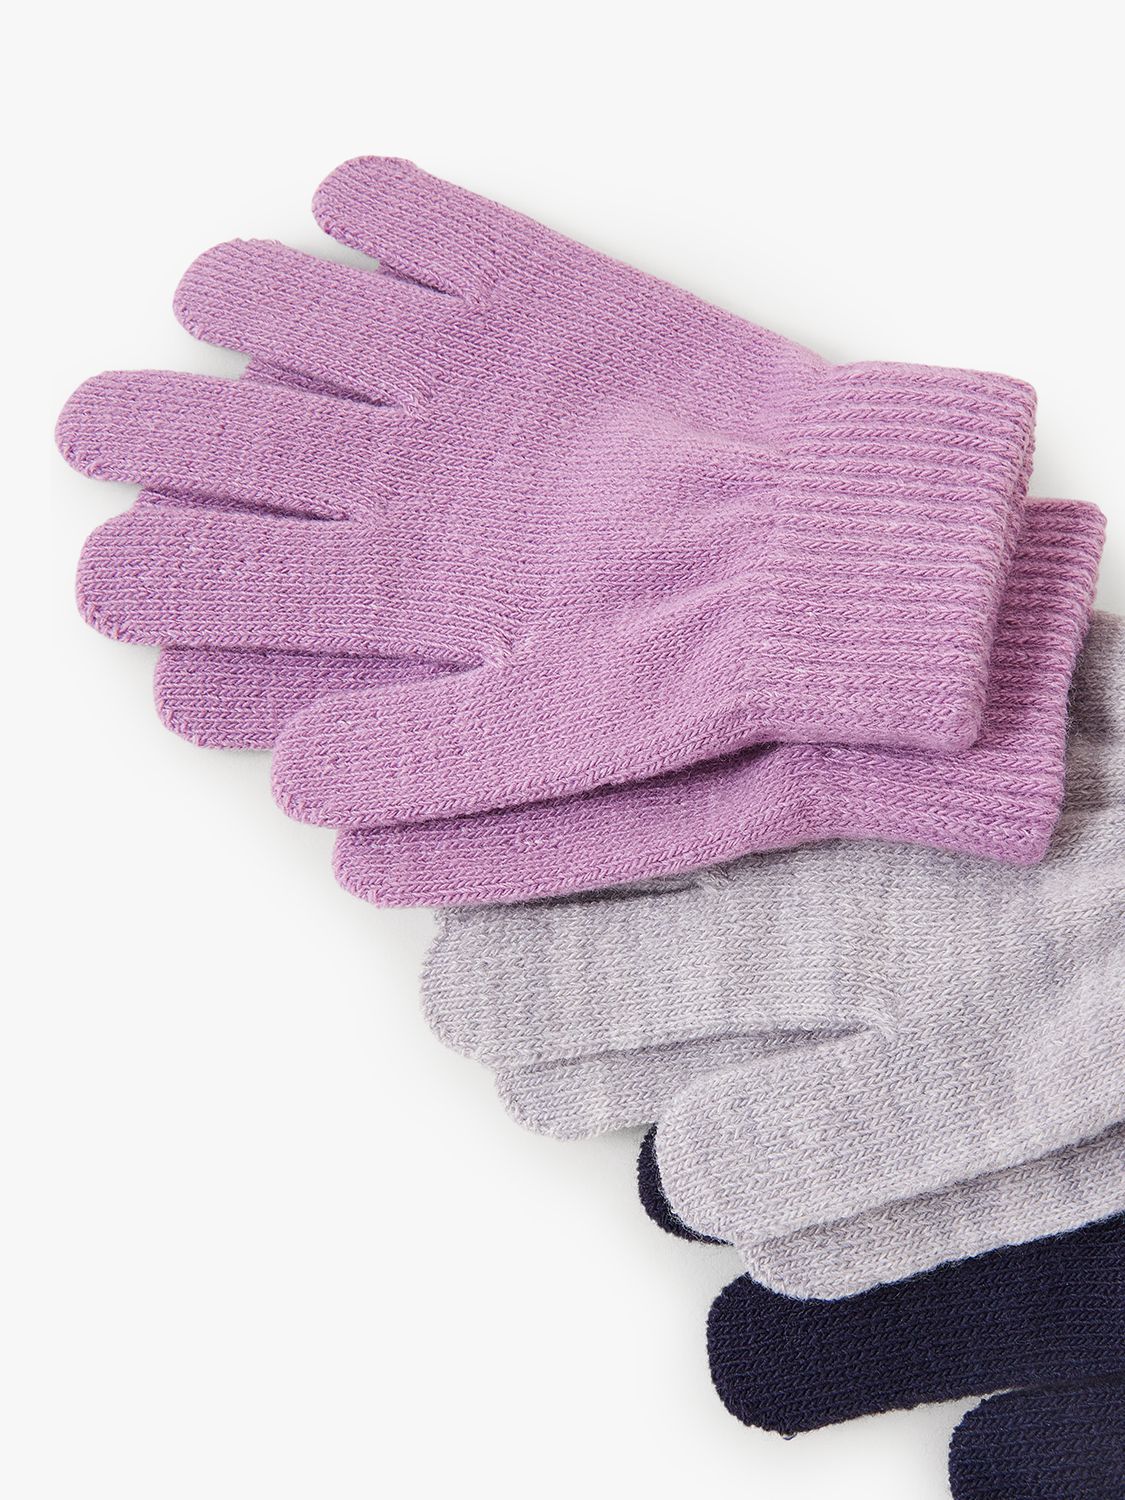 Buy Angels by Accessorize Kids' Gloves, Pack of 3, Purple/Multi Online at johnlewis.com